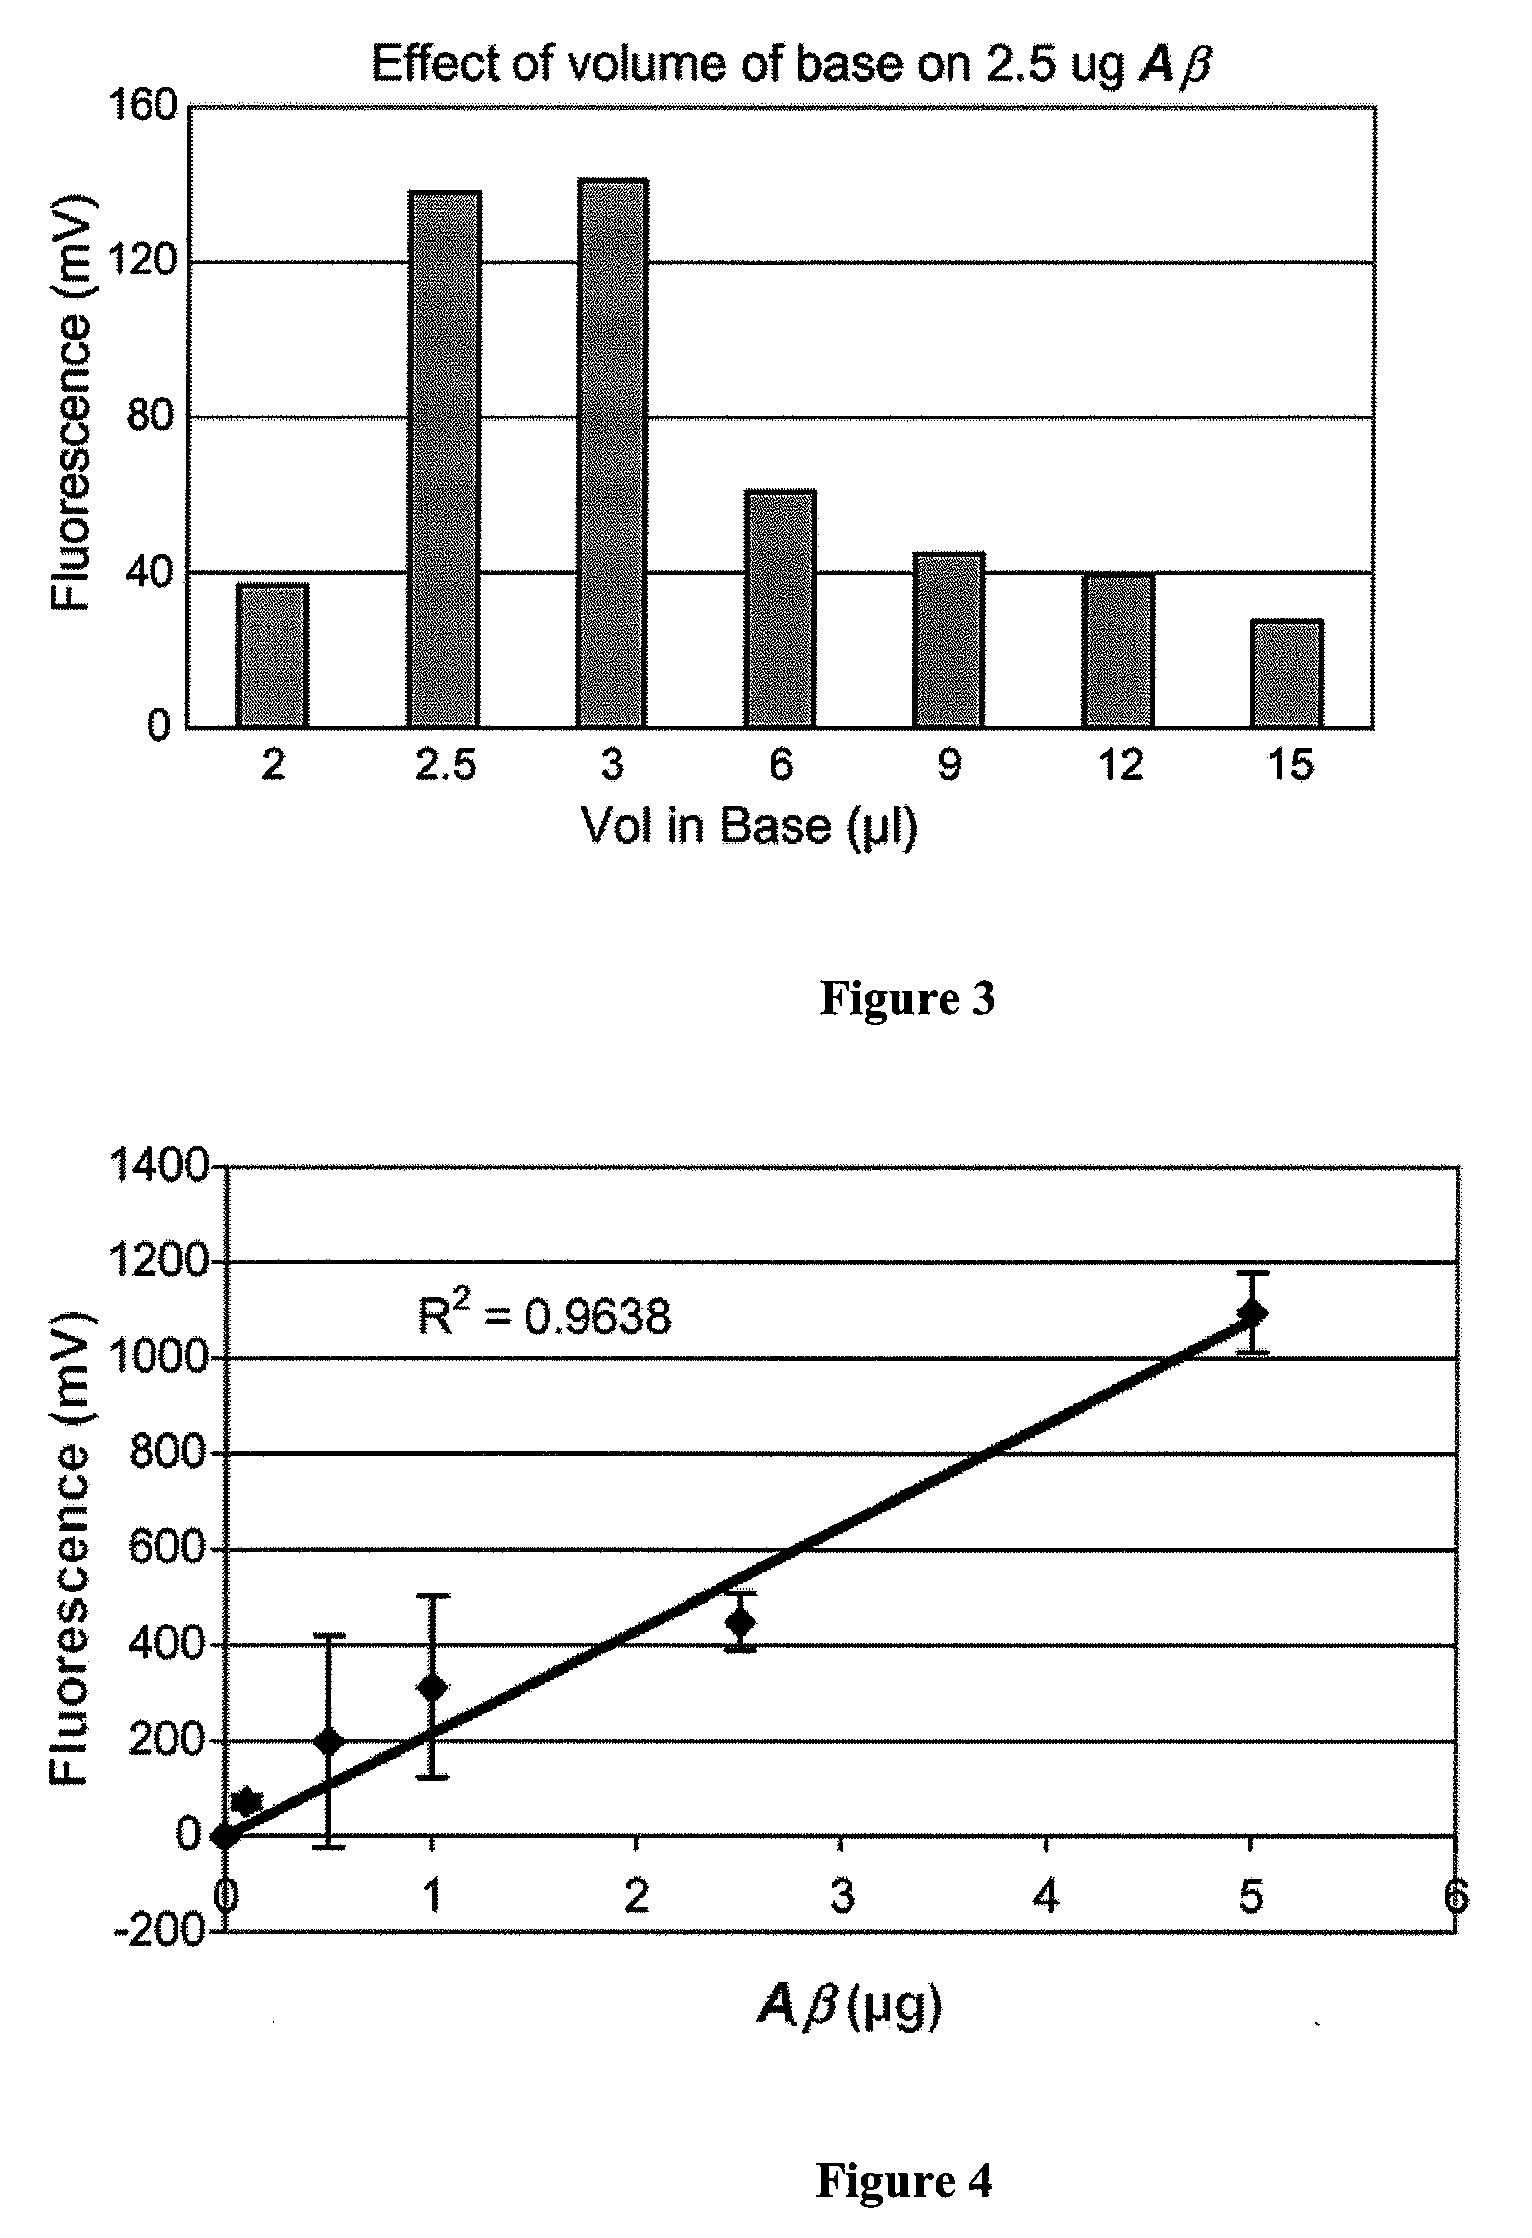 Thioflavin t method for detection of amyloid polypeptide fibril aggregation